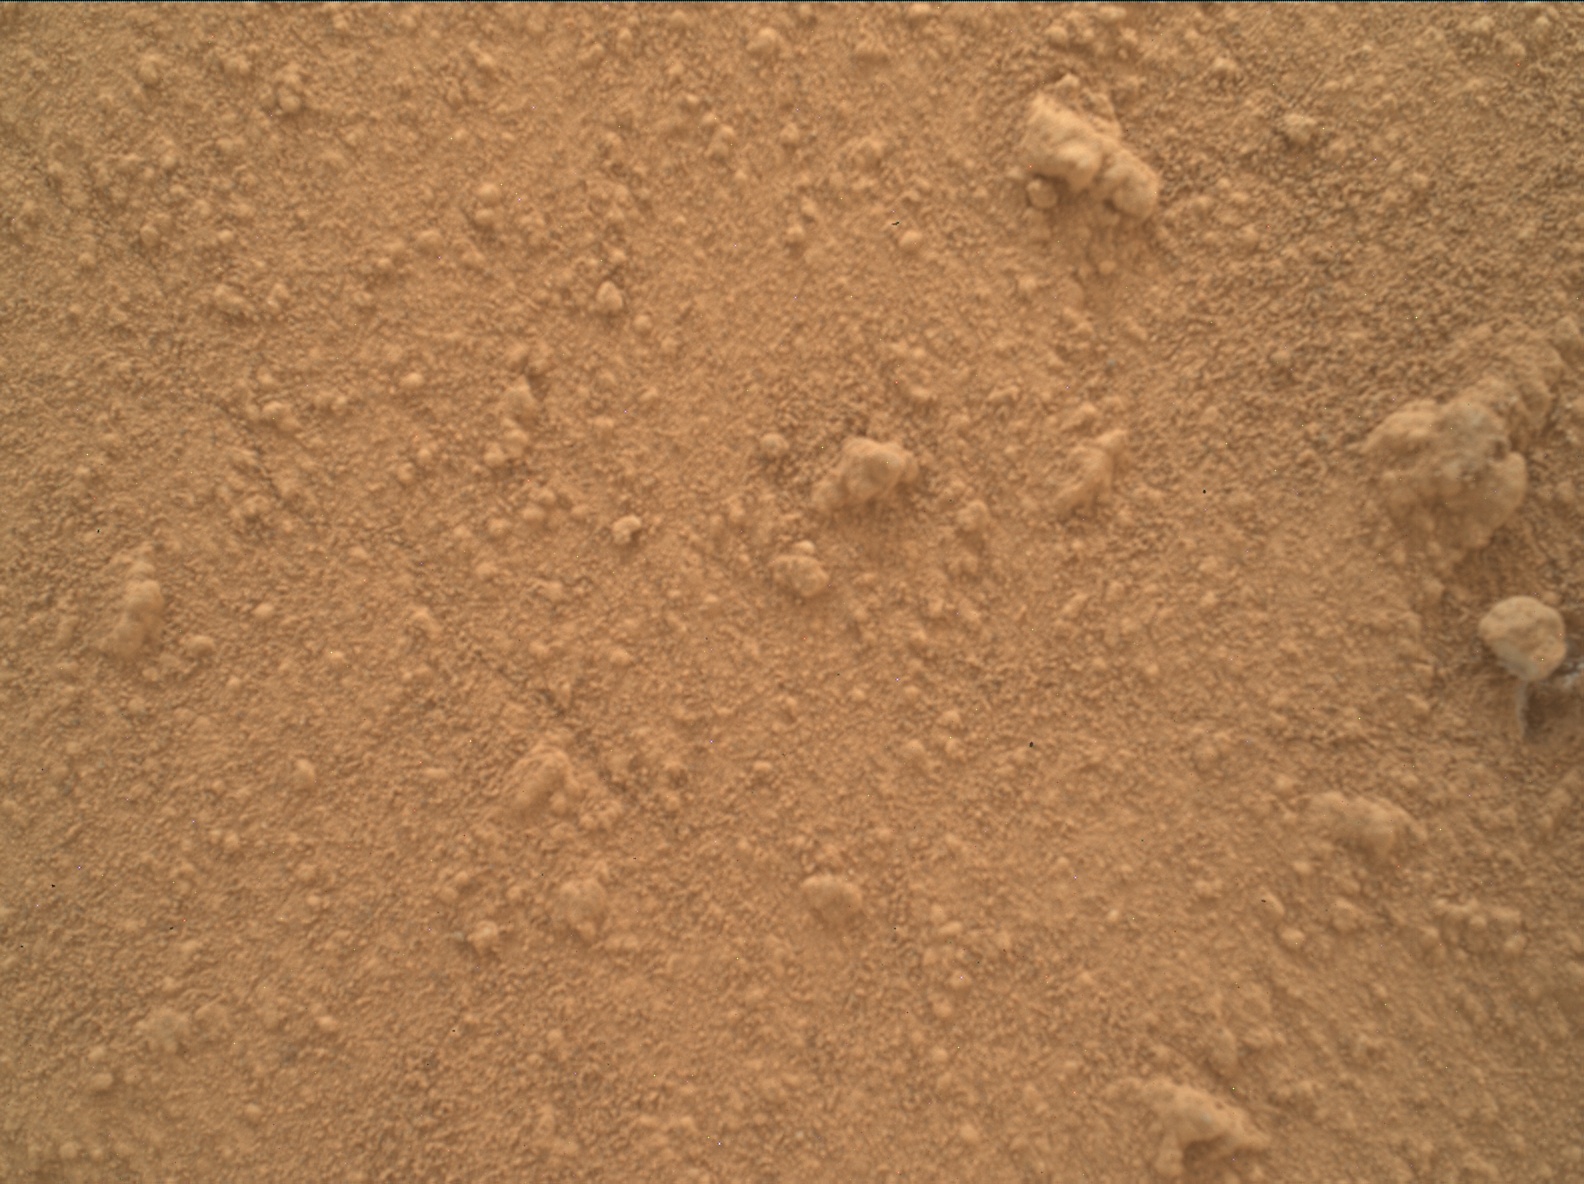 Nasa's Mars rover Curiosity acquired this image using its Mars Hand Lens Imager (MAHLI) on Sol 3862